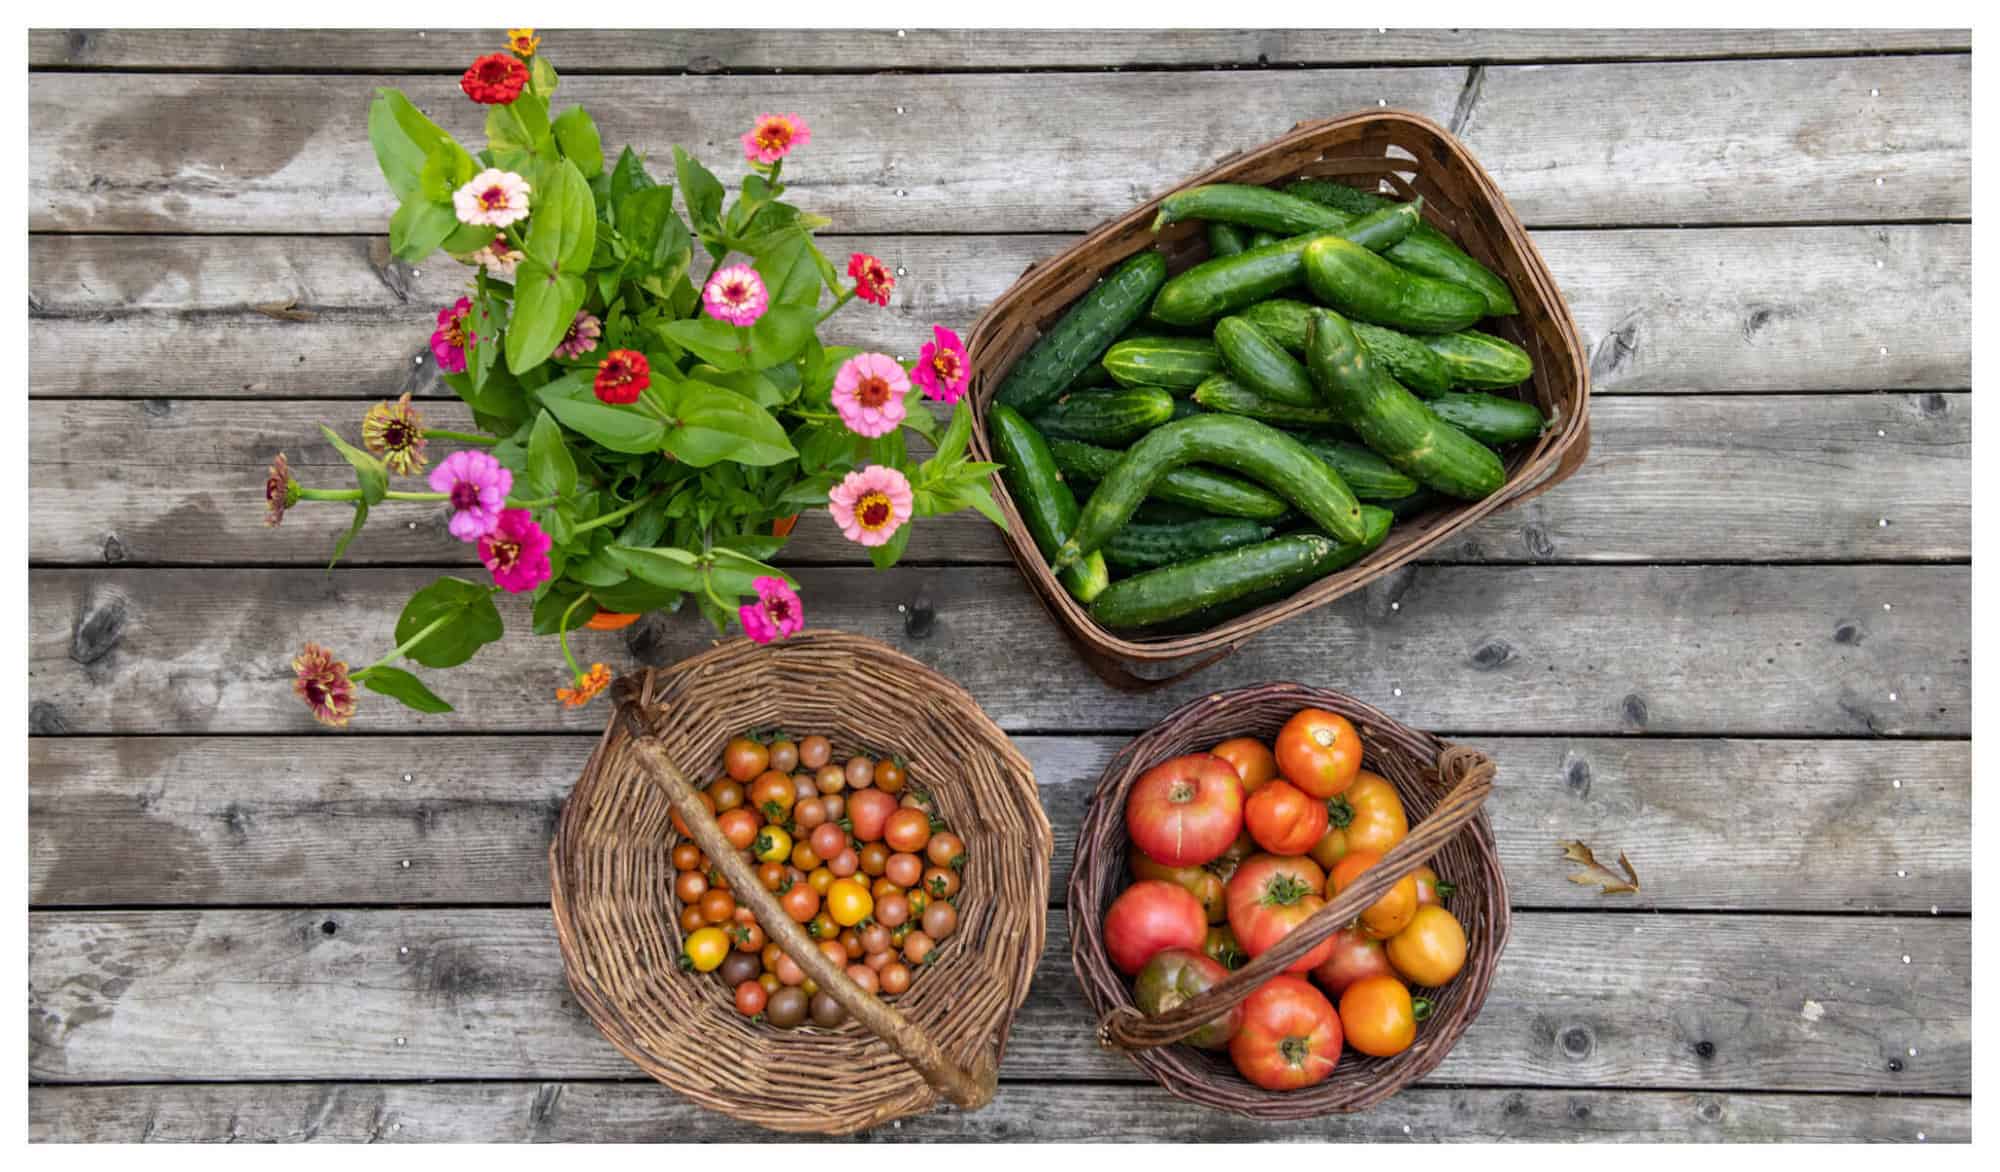 Produce and flowers from the Veggies to Table farm, including 2 wooden baskets of tomatoes, a square basket of cucumbers, and a bouquet of pink flowers sit on a wooden porch. 